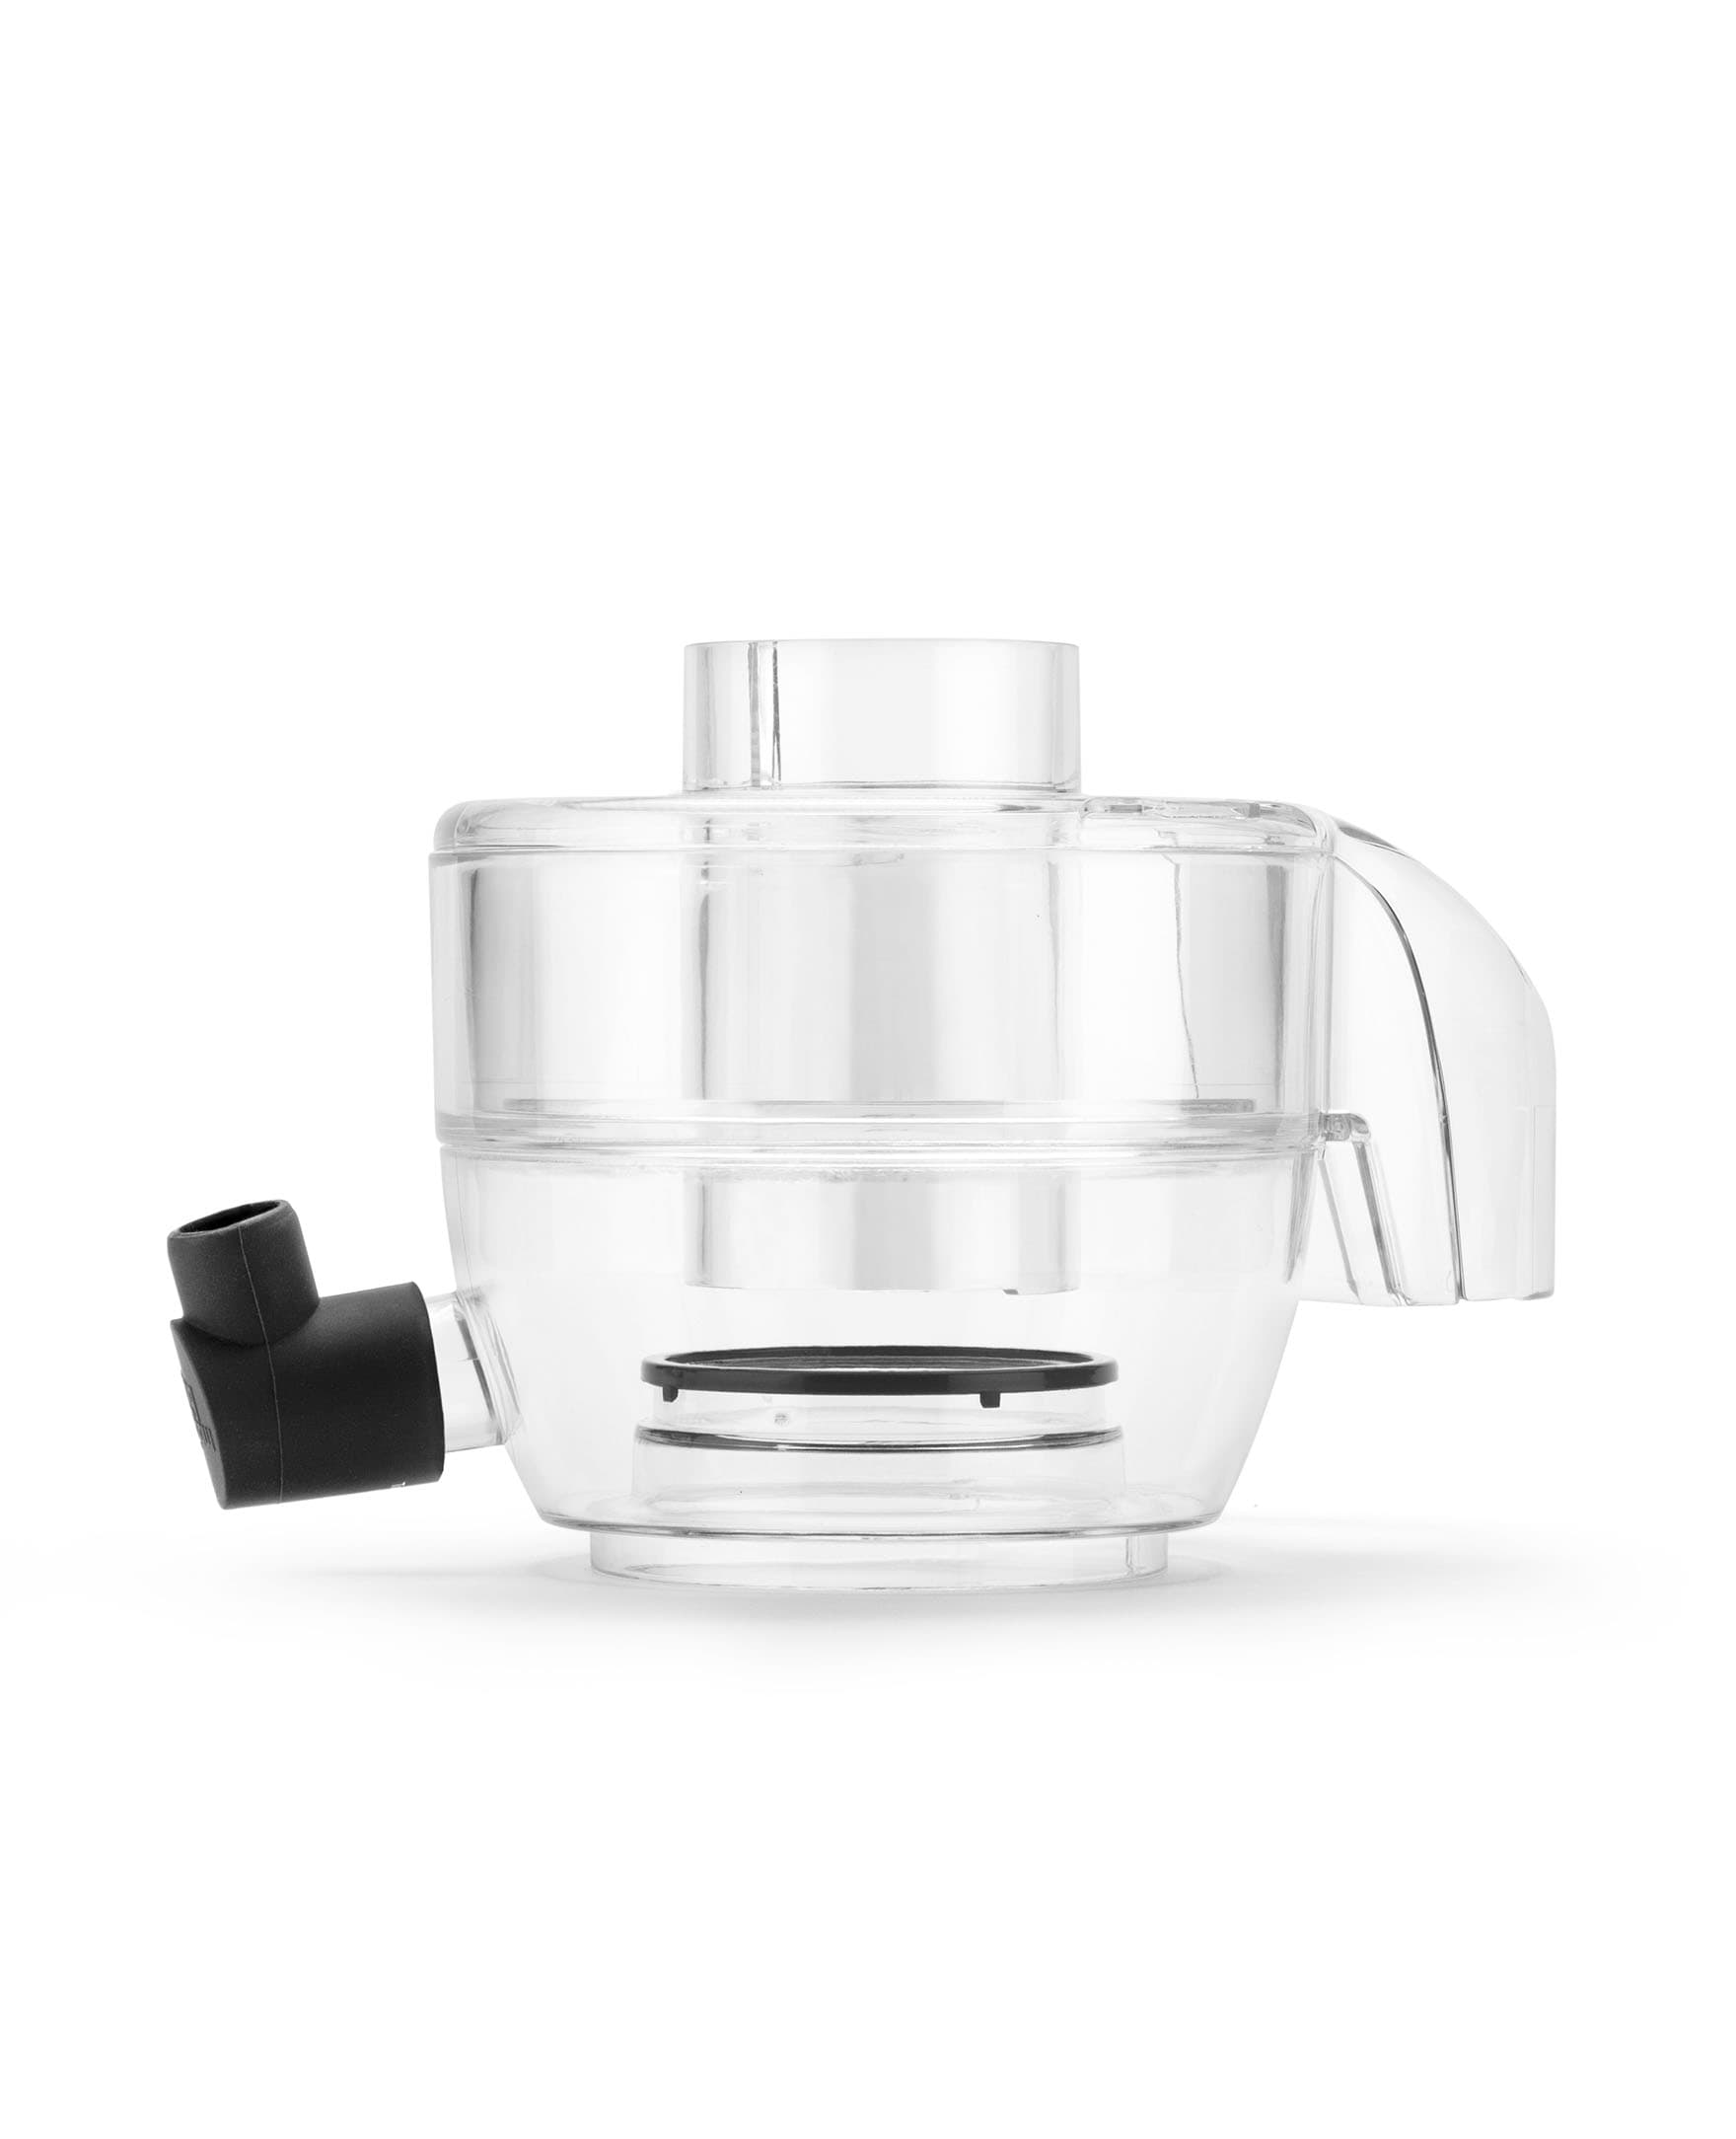 Hamilton Beach Big Mouth Juice and Blend 2-in-1 Juicer and Blender BLACK  67970 - Best Buy